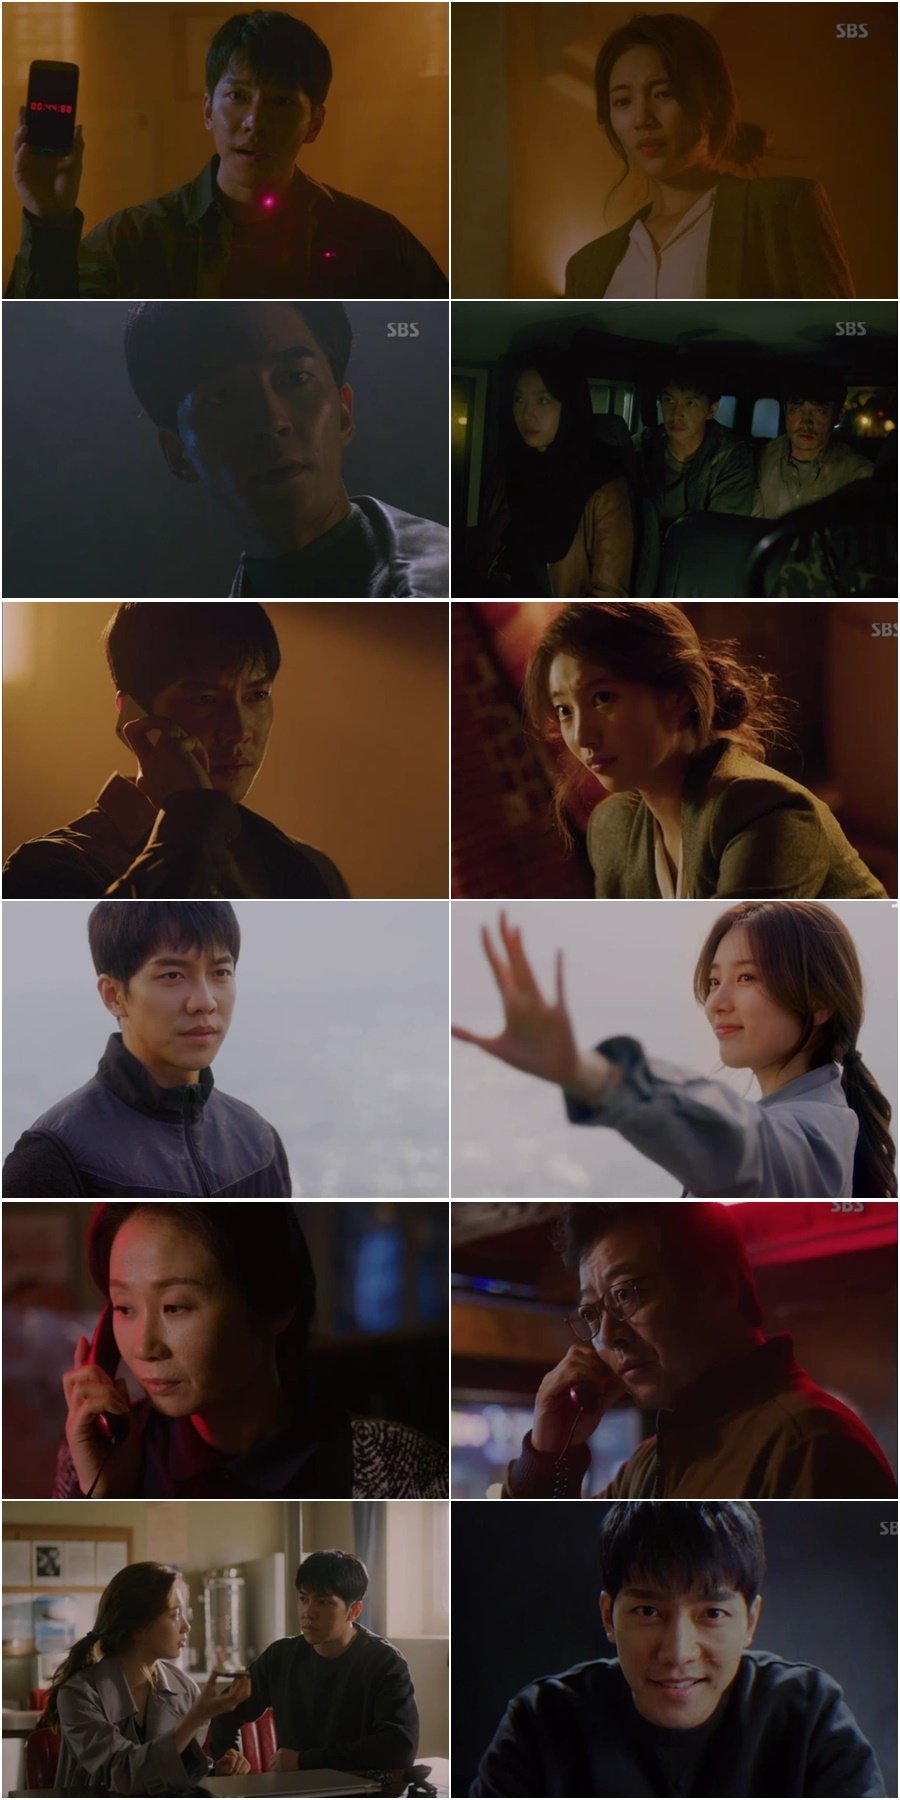 In the 10th episode of SBSs gilt drama Vagabond, which aired on the 19th, Lee Seung-gi (Chadalgun) and Bae Suzy (Gohari) escaped Morocco with the help of Prince Edward Island Park and were shown loading themselves on a ship bound for Korea with Jang Hyuk-jin (Kim Song Yuqi).In particular, Bae Suzy was deeply resonated with Lee Seung-gis Lets Get Out of Your Hand pledge to keep his conscience and continue to find the truth.Shin Sung-rok (Ki Tae-woong), who had been watching the crisis that faced Lee Seung-gi and Bae Suzy on the day of the broadcast, put the scene in darkness with a base that blocked electricity, while Lee Seung-gi and Bae Suzy arrived in a panic room with Shin Sung-rok and Shin Seung-hwan (Kim Se-hoon) As Ryu Won (Mickey) said, I set the cell phone timer and waited.Yoo Tae-woong (Hwang Pil-yong) and his team members used a transoscope to follow them and then blew up the fire door, and they were in a confrontation situation again and fought a gunfight between the living room.At this time, when the timer time was over, the central floor of the living room was turned off with an intense explosion, Yoo Tae-woong and his team members crashed to the floor, and Shin Sung-rok shouted traitor and confirmed and killed Yoo Tae-woong,Shin Sung-rok then informed Bae Suzy that Kim Jong-soo (Ahn Ki-dong) sent an assassination team with the party, Make sure to bring Kim Yuqi alive, and that Cheong Wa Dae was involved.He then told me the password Vagabond along with the gun barrel chicken phone number and sent Lee Seung-gi, Bae Suzy and Jang Hyuk-jin to leave, saying, You are the only one who will take on a great mission.And the three people who arrived at Morocco night market through the sewer met Ryuwon, and when Ryuwon was checked, he showed the question tattoo on his wrist to the inspector and passed through the checkpoint safely.Lee Seung-gi, Bae Suzy and Jang Hyuk-jin arrived at Tangier Airport, and Lee Kyung-young (Prince Edward Island Park), who was watching them through the monitor, instructed Lee Seung-gi to come to Korea by freighter to be sent at dawn and said, The government of the Republic of Korea is involved in this case.I dont want any unfortunate events to happen to Mr. Chadalgun, so please leave your hands now, Lee Seung-gi said, I will put Kim in court with my own hands.Lee Seung-gi, who felt that there was a more frightening and difficult fight in the future, approached Bae Suzy and said, Now get your hands off me.You are a civil servant, but if you fight against the state, you do not know what will happen, Bae Suzy said. What if this happens next?Im a public official, so I have to pretend that I didnt see anything bad in the country, he said. Hoon and Hoon are watching my friends, my father, Colonel Gok Kang-chul, up there, but how can I just run away?We will give the public the right information this time, bad bastards, never let them do anything bad again, he said, giving deep impressions and echoes as he tried to protect Honor and his conscience as an NIS agent.Moreover, in the ending, Lee Seung-gi and Bae Suzy presented a delightful catharsis with the appearance of disturbing the NIS.Under Min Jae-siks direction, Lee Seung-gi, Bae Suzy, and Jang Hyuk-jin were ordered to be arrested for Interpol, and suddenly three people were seen on the NIS station room monitor, which excited them, followed by incredible scenes in airports and port waiting rooms in different countries such as Spain, France, Italy and Turkey.And Lee Seung-gis face was closed up through the front monitor, and Shin Sung-rok, Kim Min-jong, and Min Jae-sik were all fucked up.I am going to smash it soon. He gave a great pleasure to the appearance of smiling with an intense ambassador.